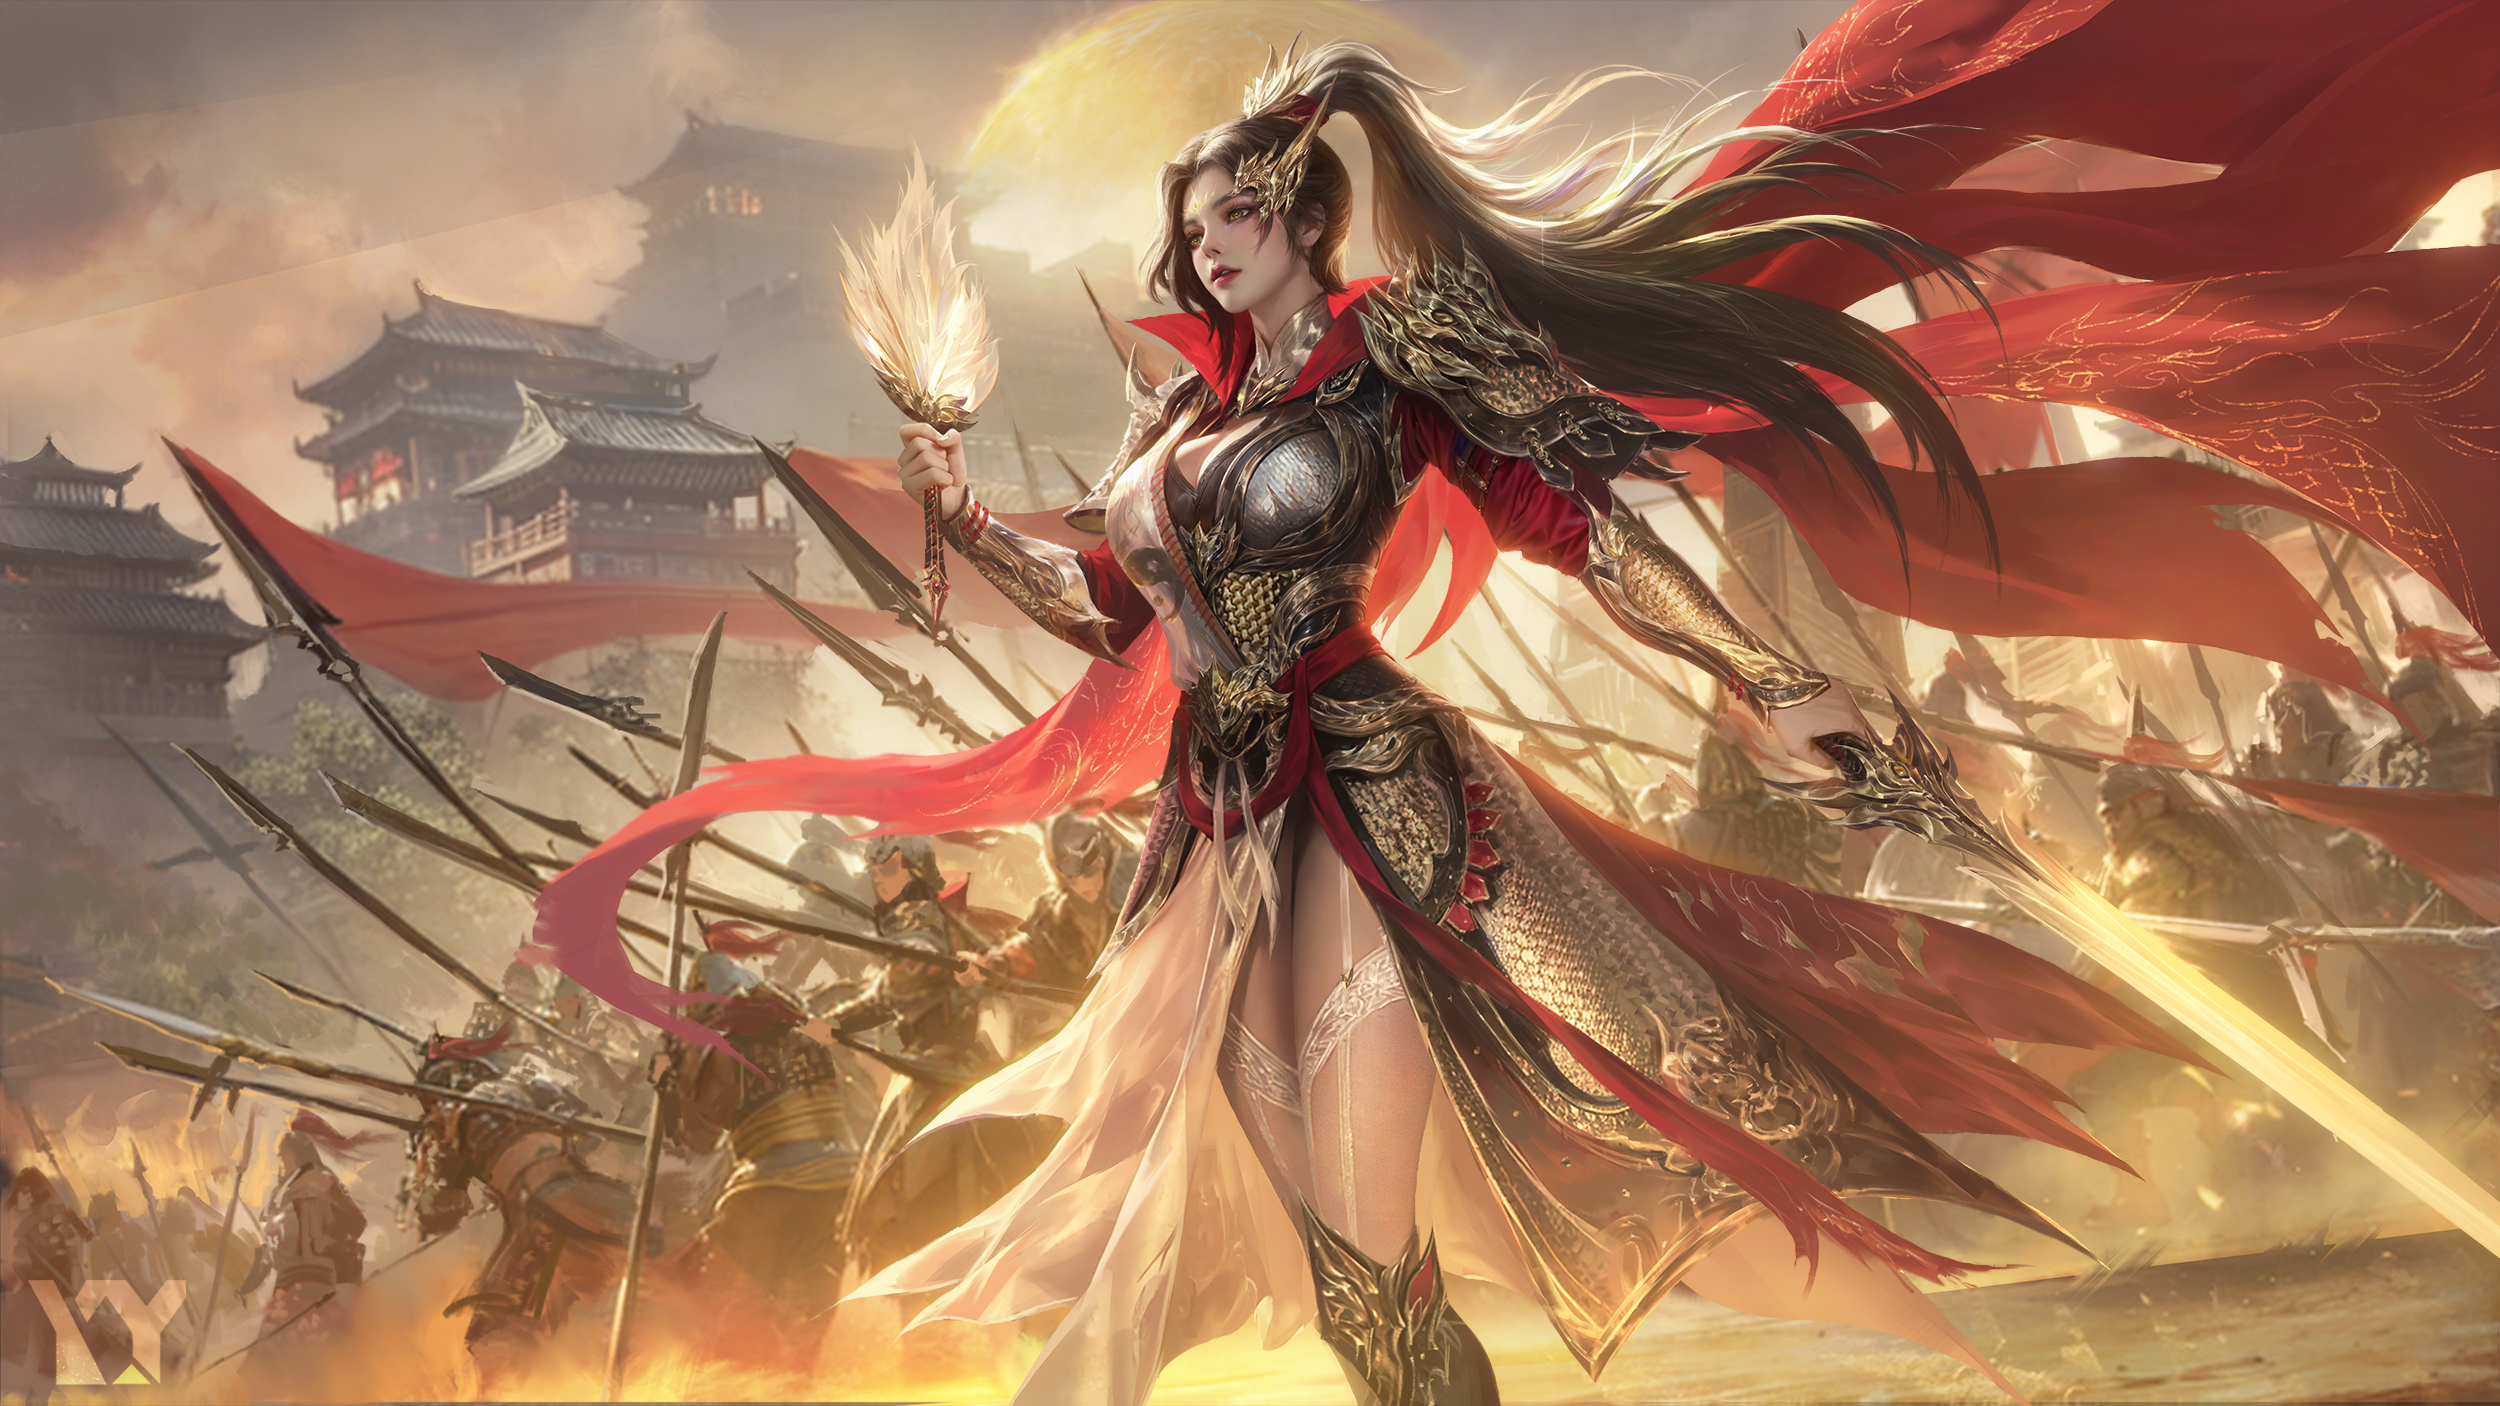 Character Design Warrior Women Women Outdoors Ponytail Long Hair Sword Weapon Armor Army Looking Awa 2500x1406